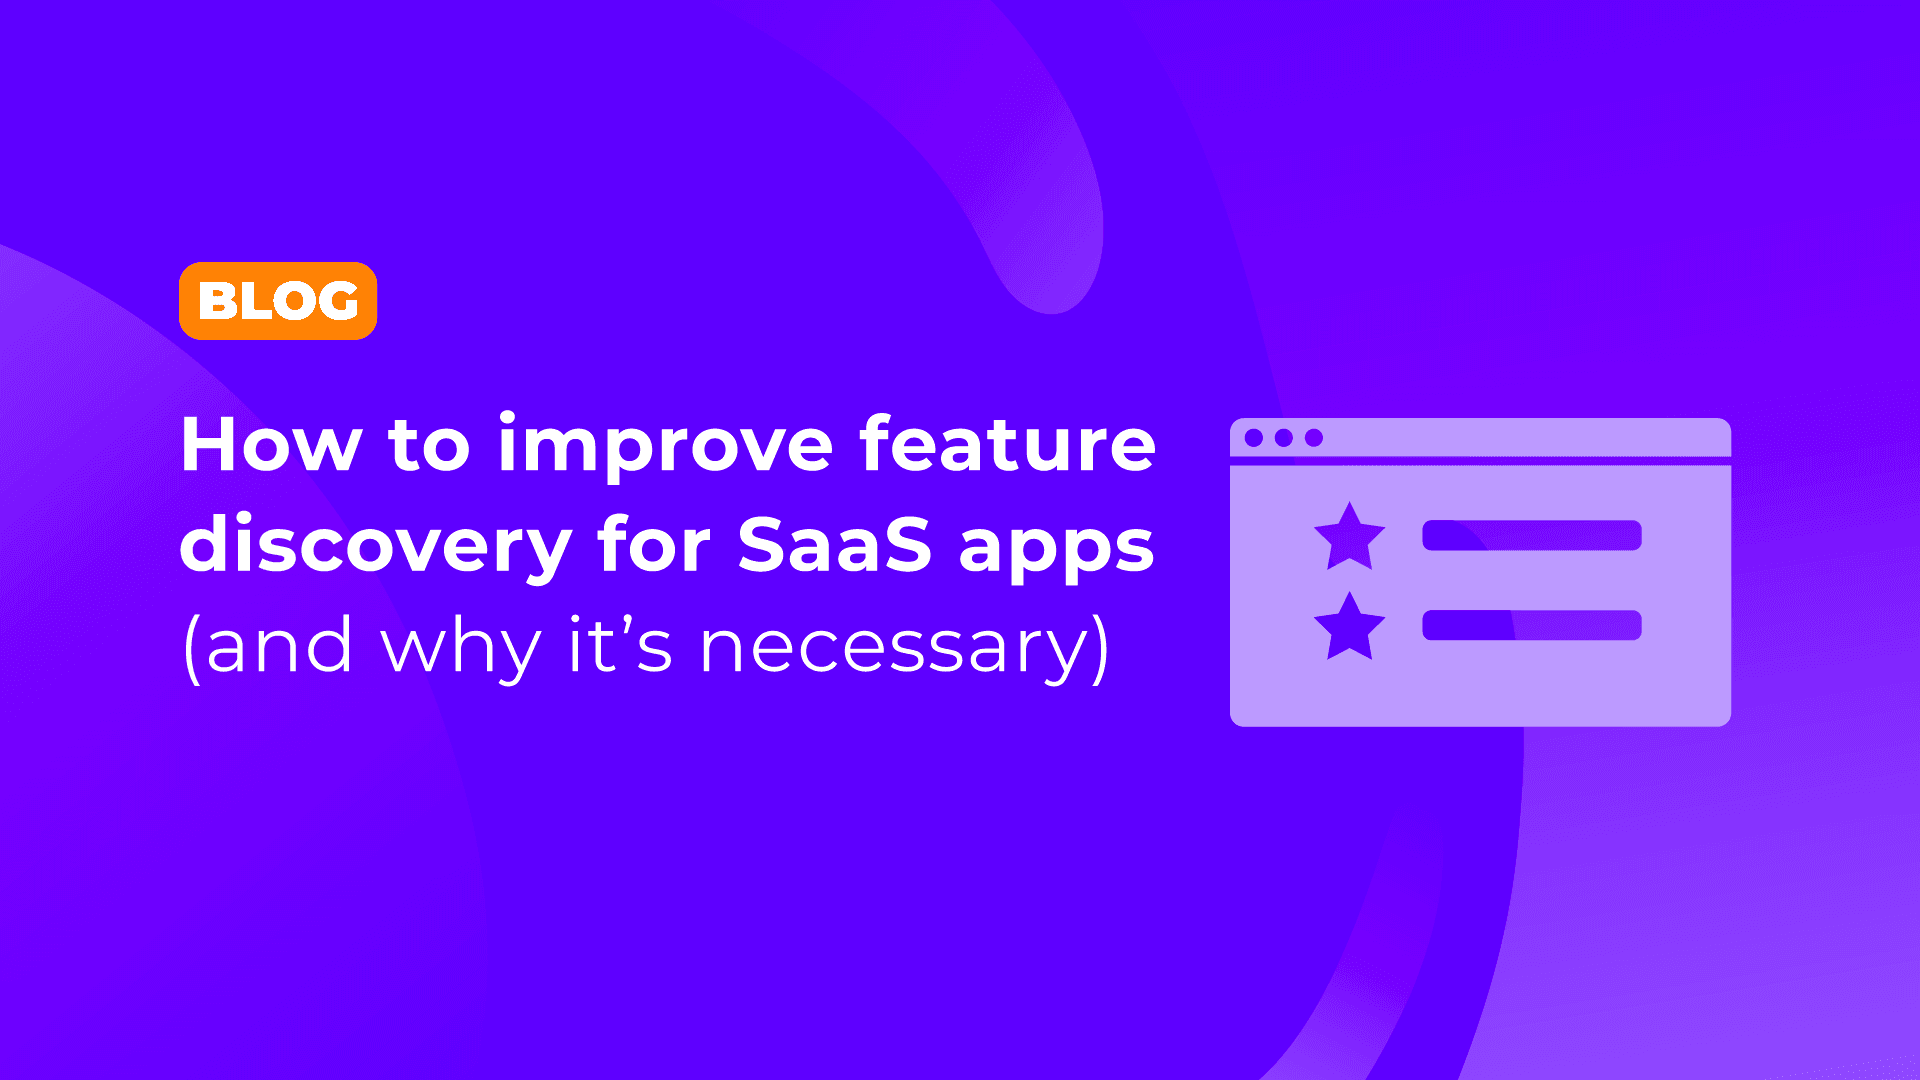 How to improve feature discovery for SaaS apps (and why it’s necessary) cover